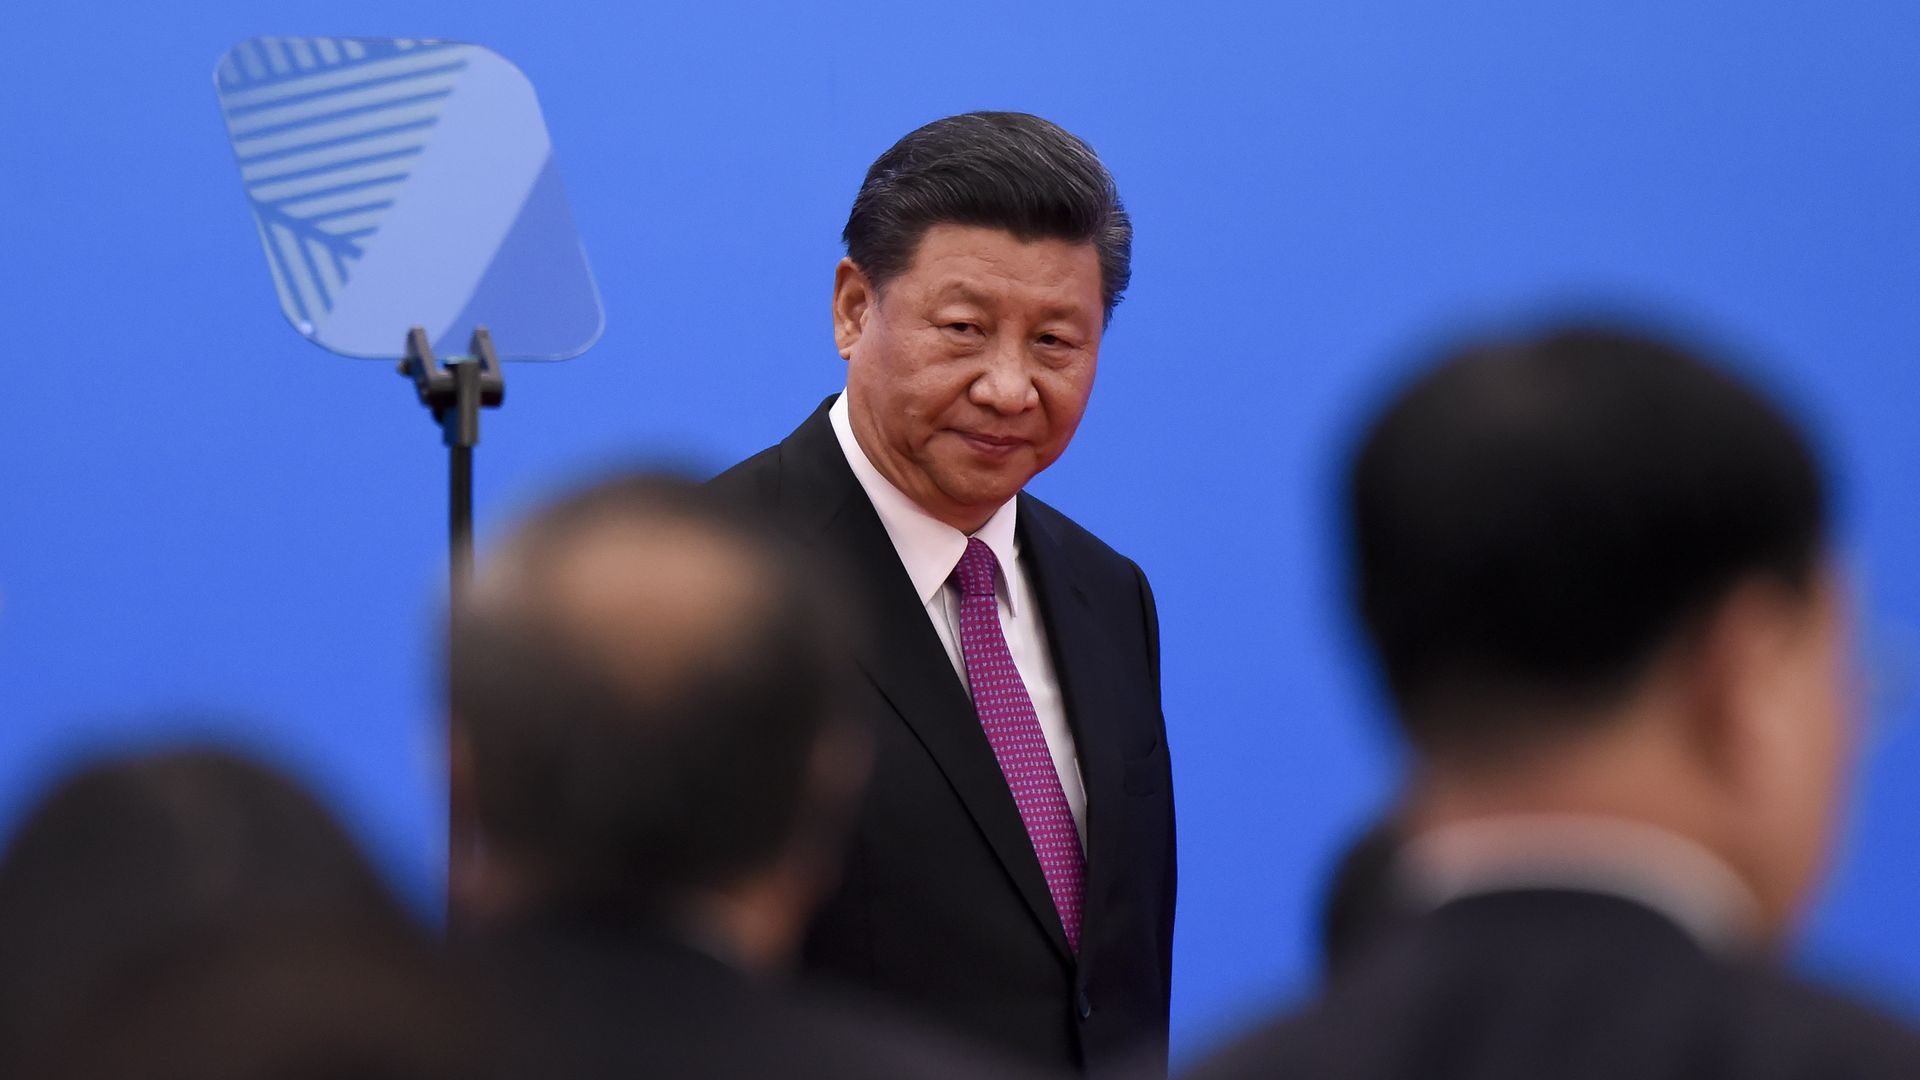 In this image, Xi Jinping looks to the left while walking on a stage.